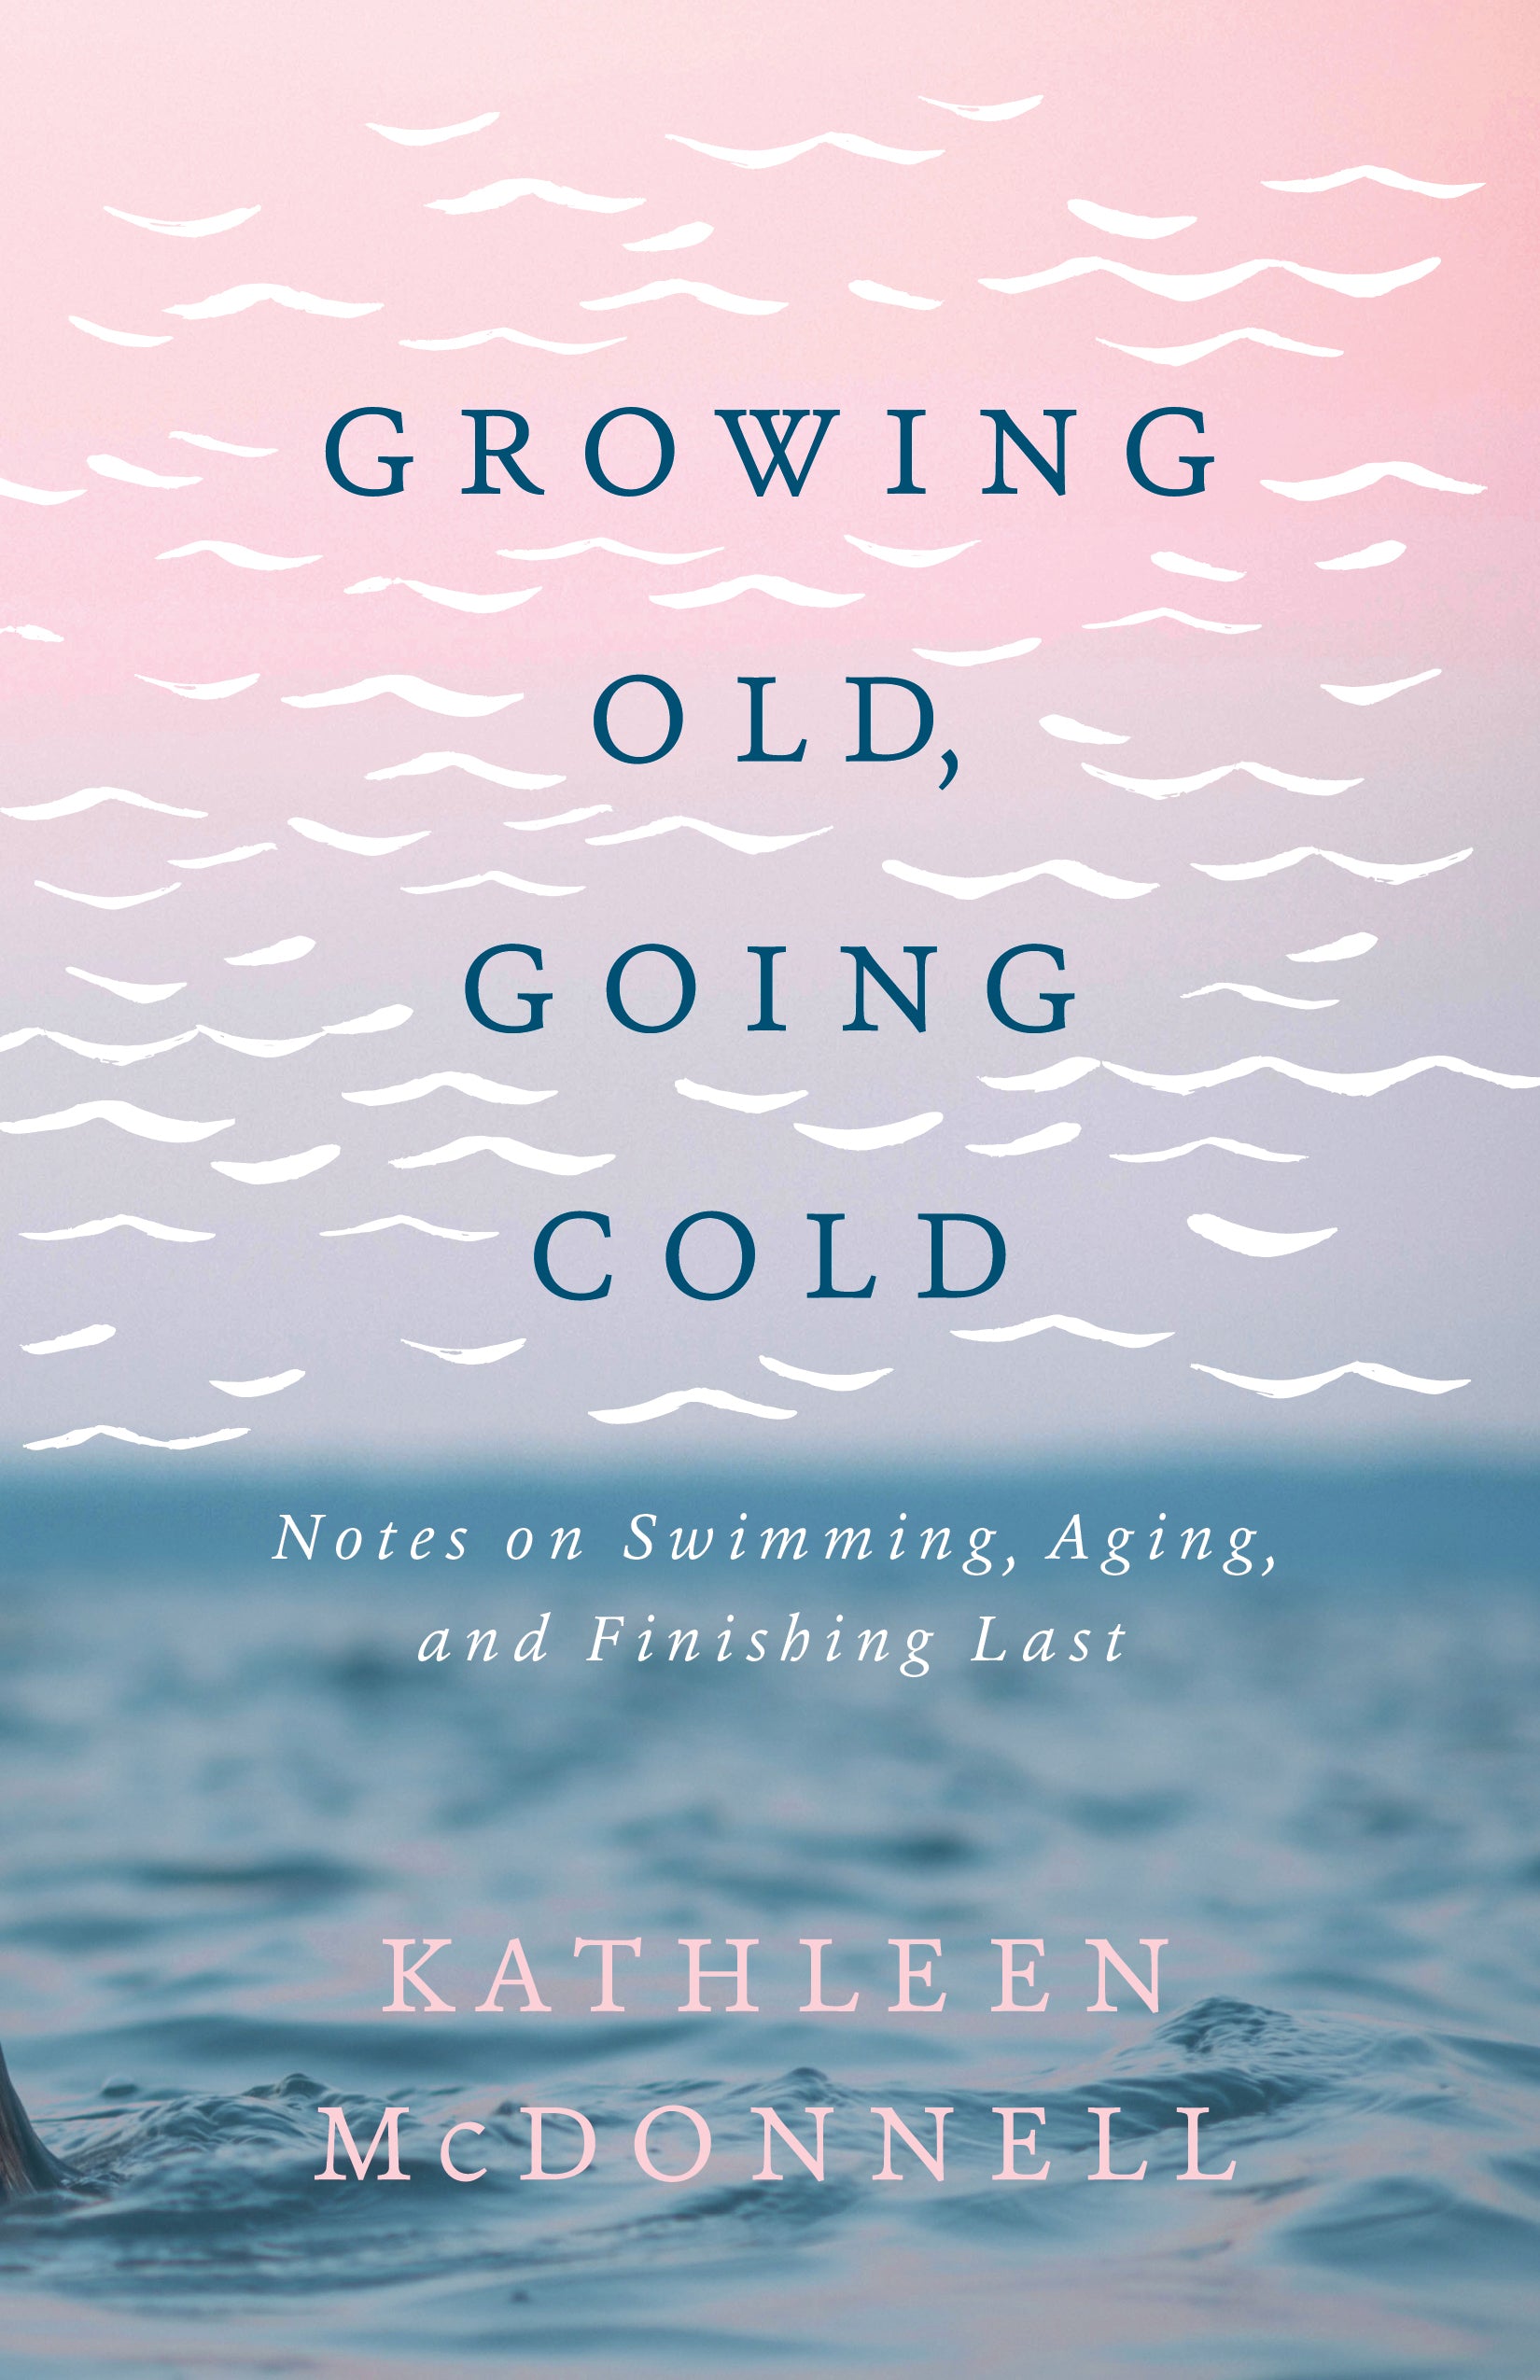 Growing Old, Going Cold-ebook